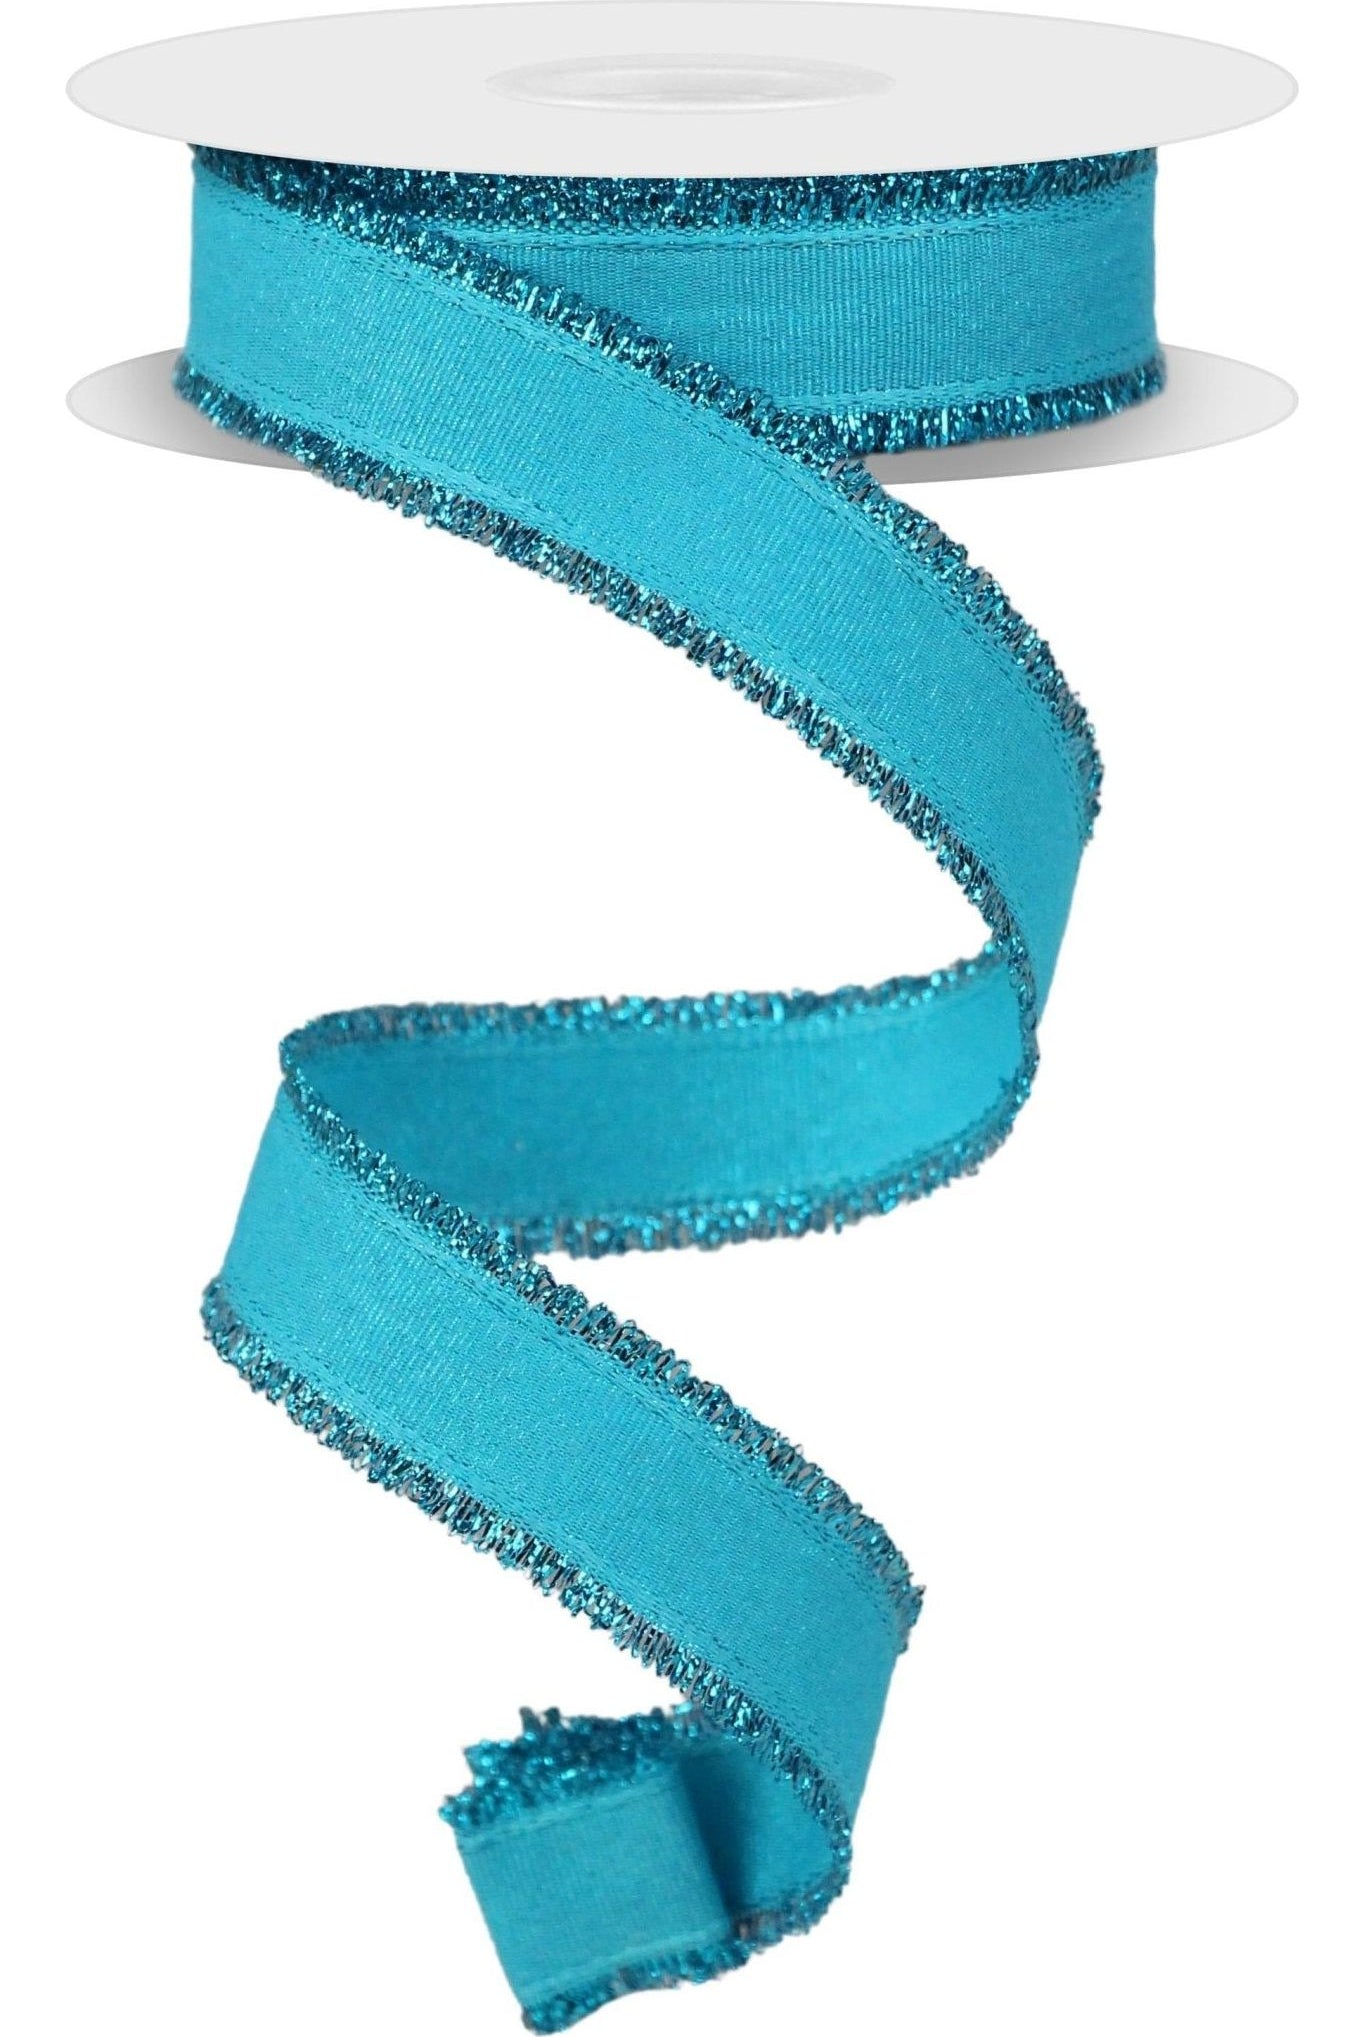 Shop For 7/8" Fuzzy Edge Ribbon: Turquoise (10 Yards) RN587936